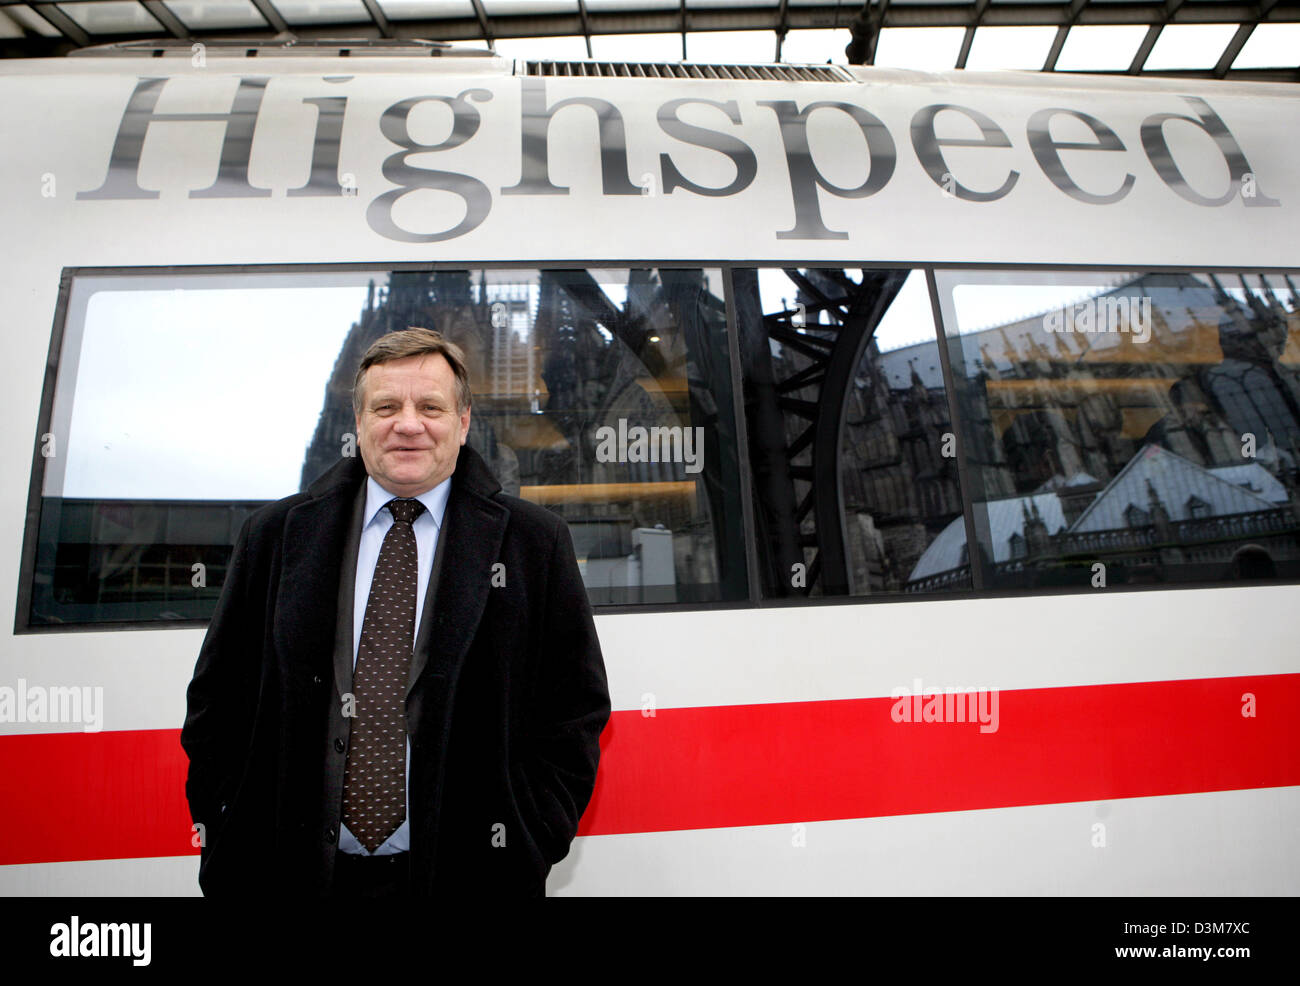 (dpa) - CEO of the German Railway, Hartmut Mehdorn, stands in front of the first Intercity Express (ICE) train equipped with a HotSpot of the German Telecom in the Central Station of Cologne, Germany, Tuesday 20 December 2005. The two companies test the highspeed internet access pilot project joint venture on the track between Dortmund and Cologne where passengers can access the in Stock Photo